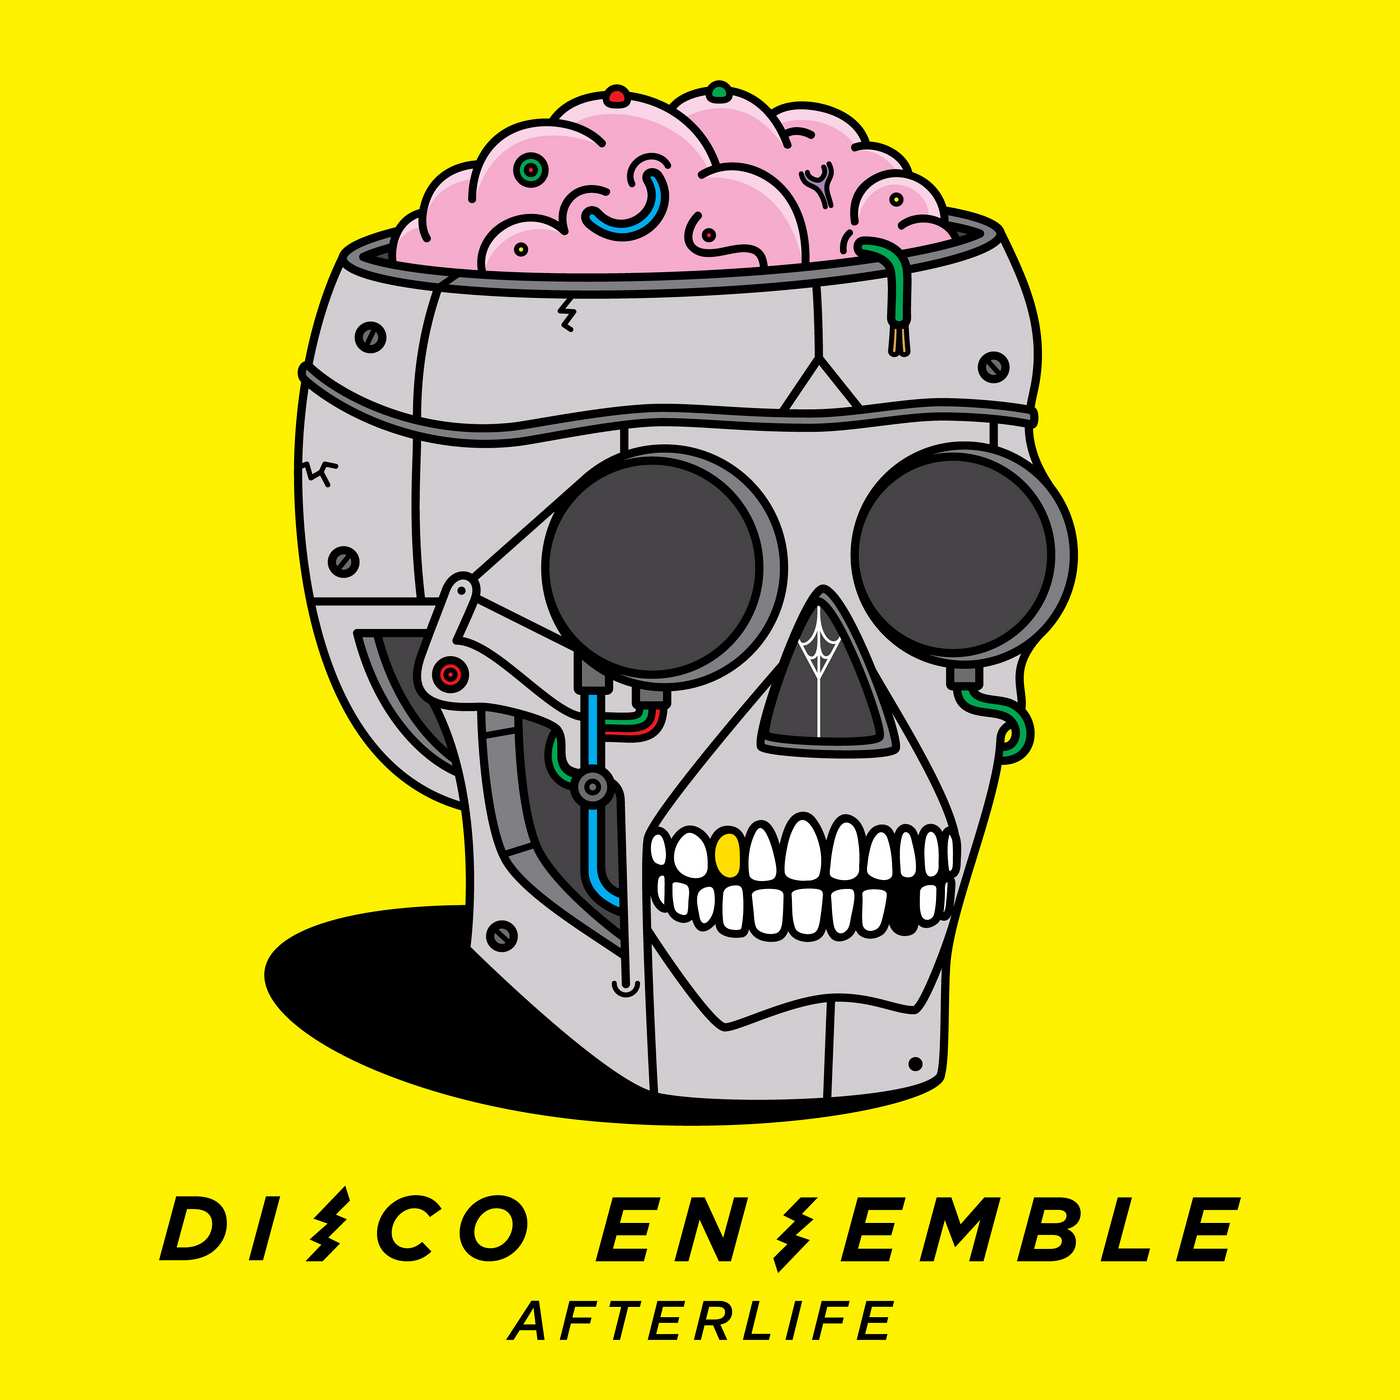 Disco Ensemble: Afterlife (2017) Book Cover